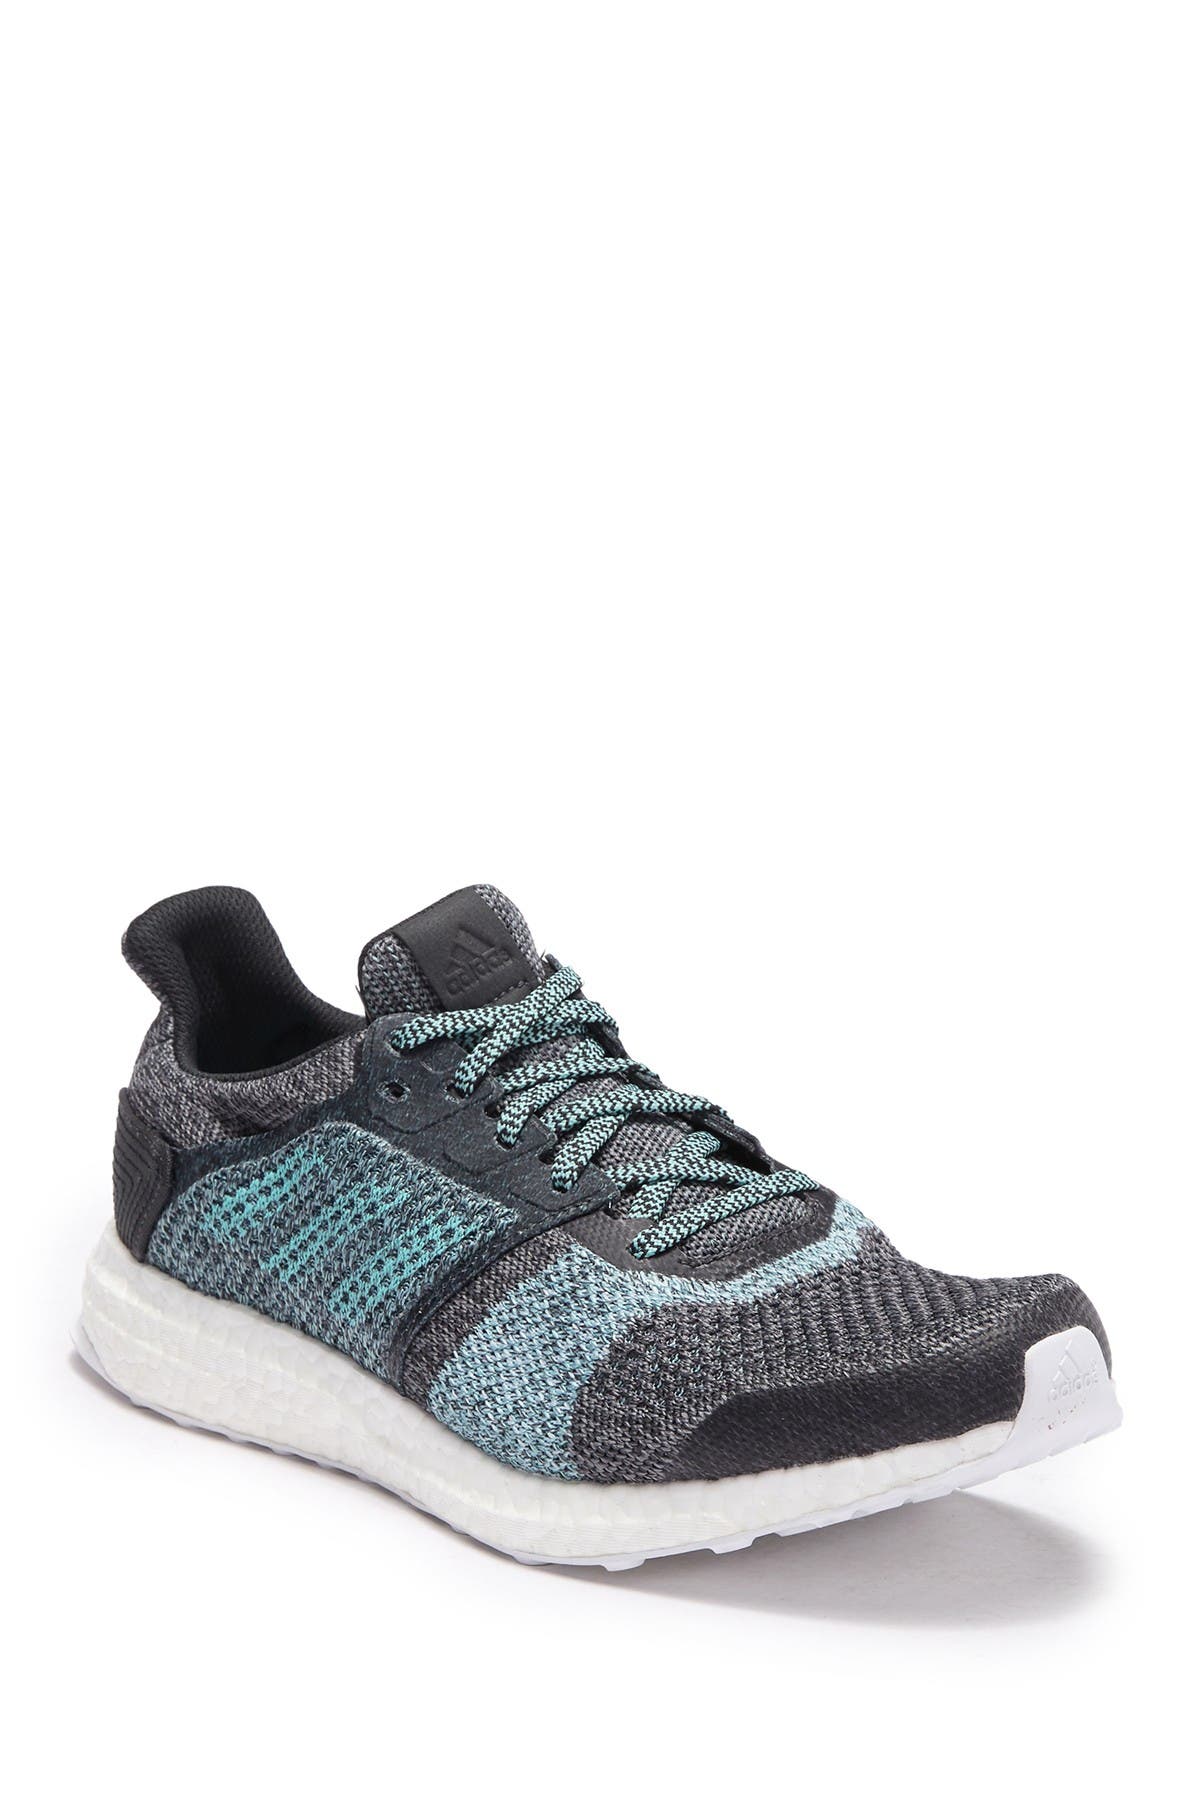 ultraboost st parley shoes womens